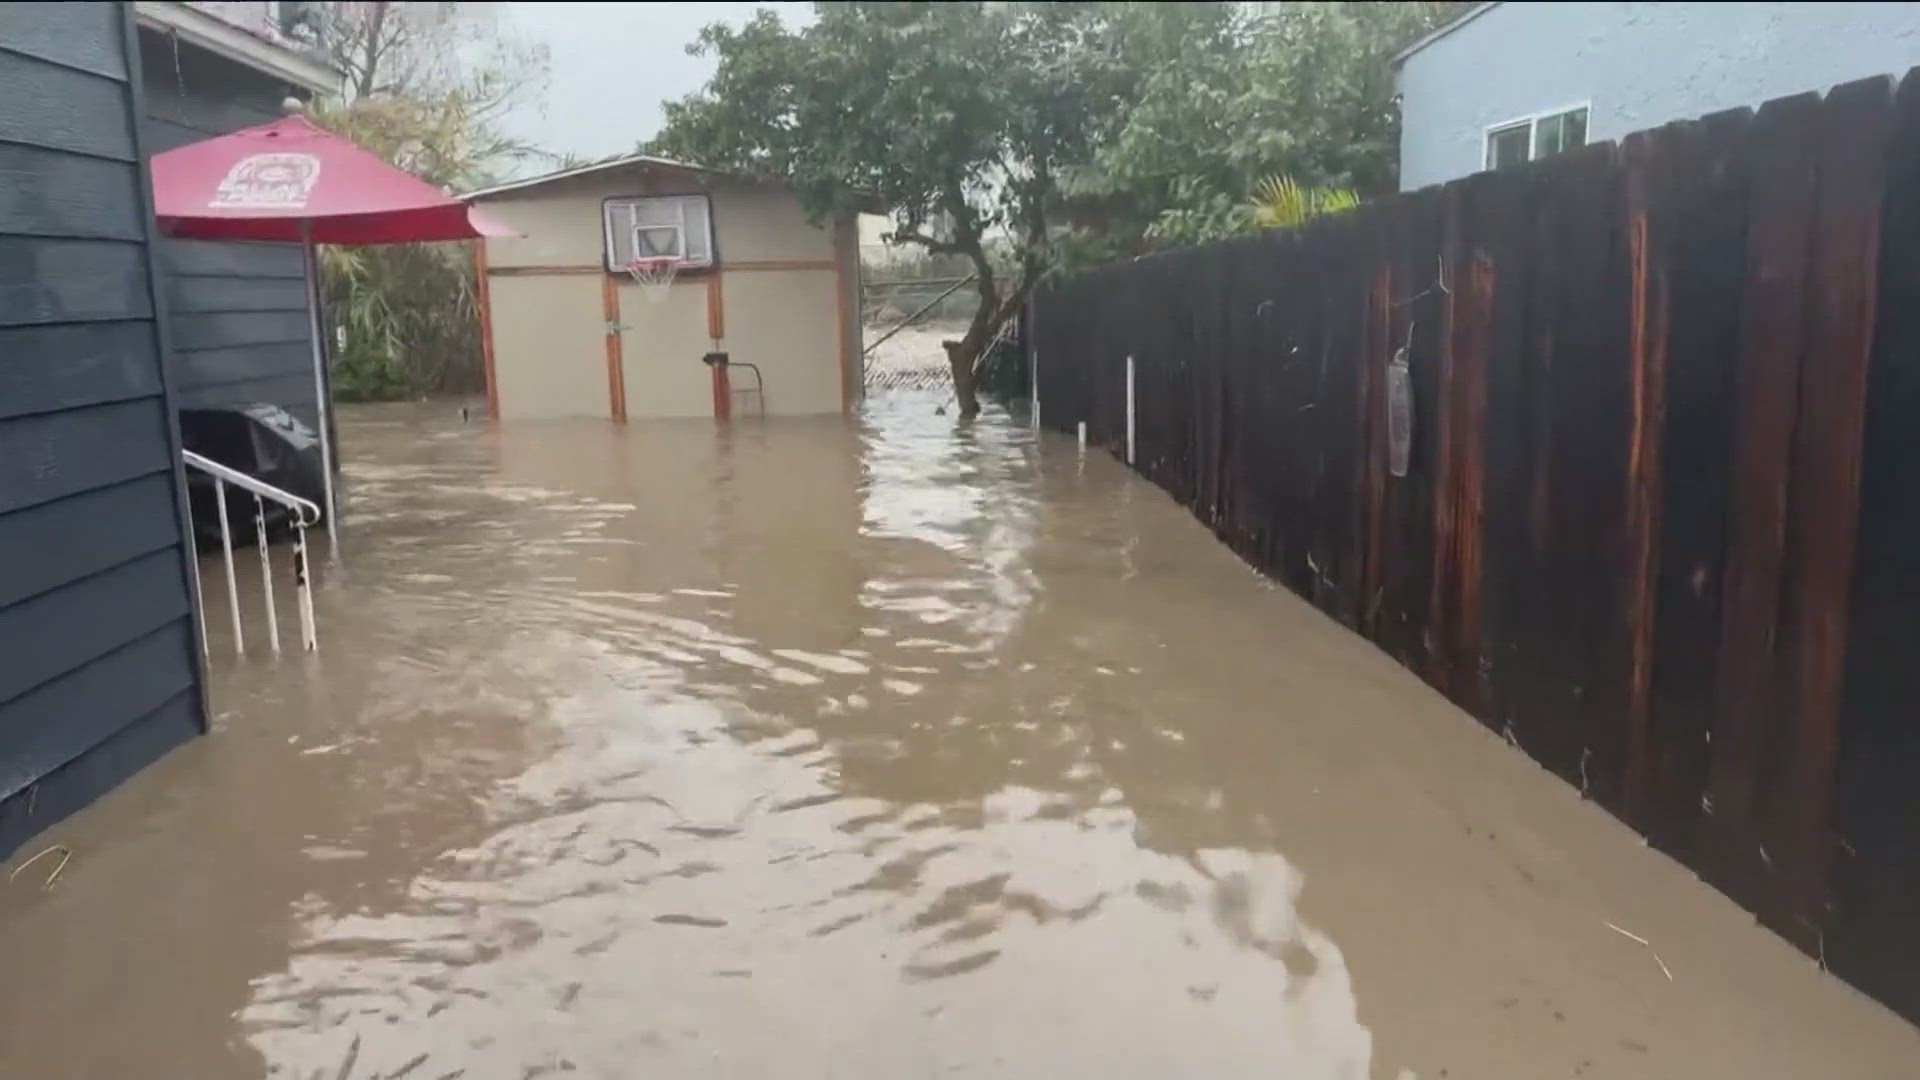 Separate flooding policy needed to insure home is covered, max is $250,000